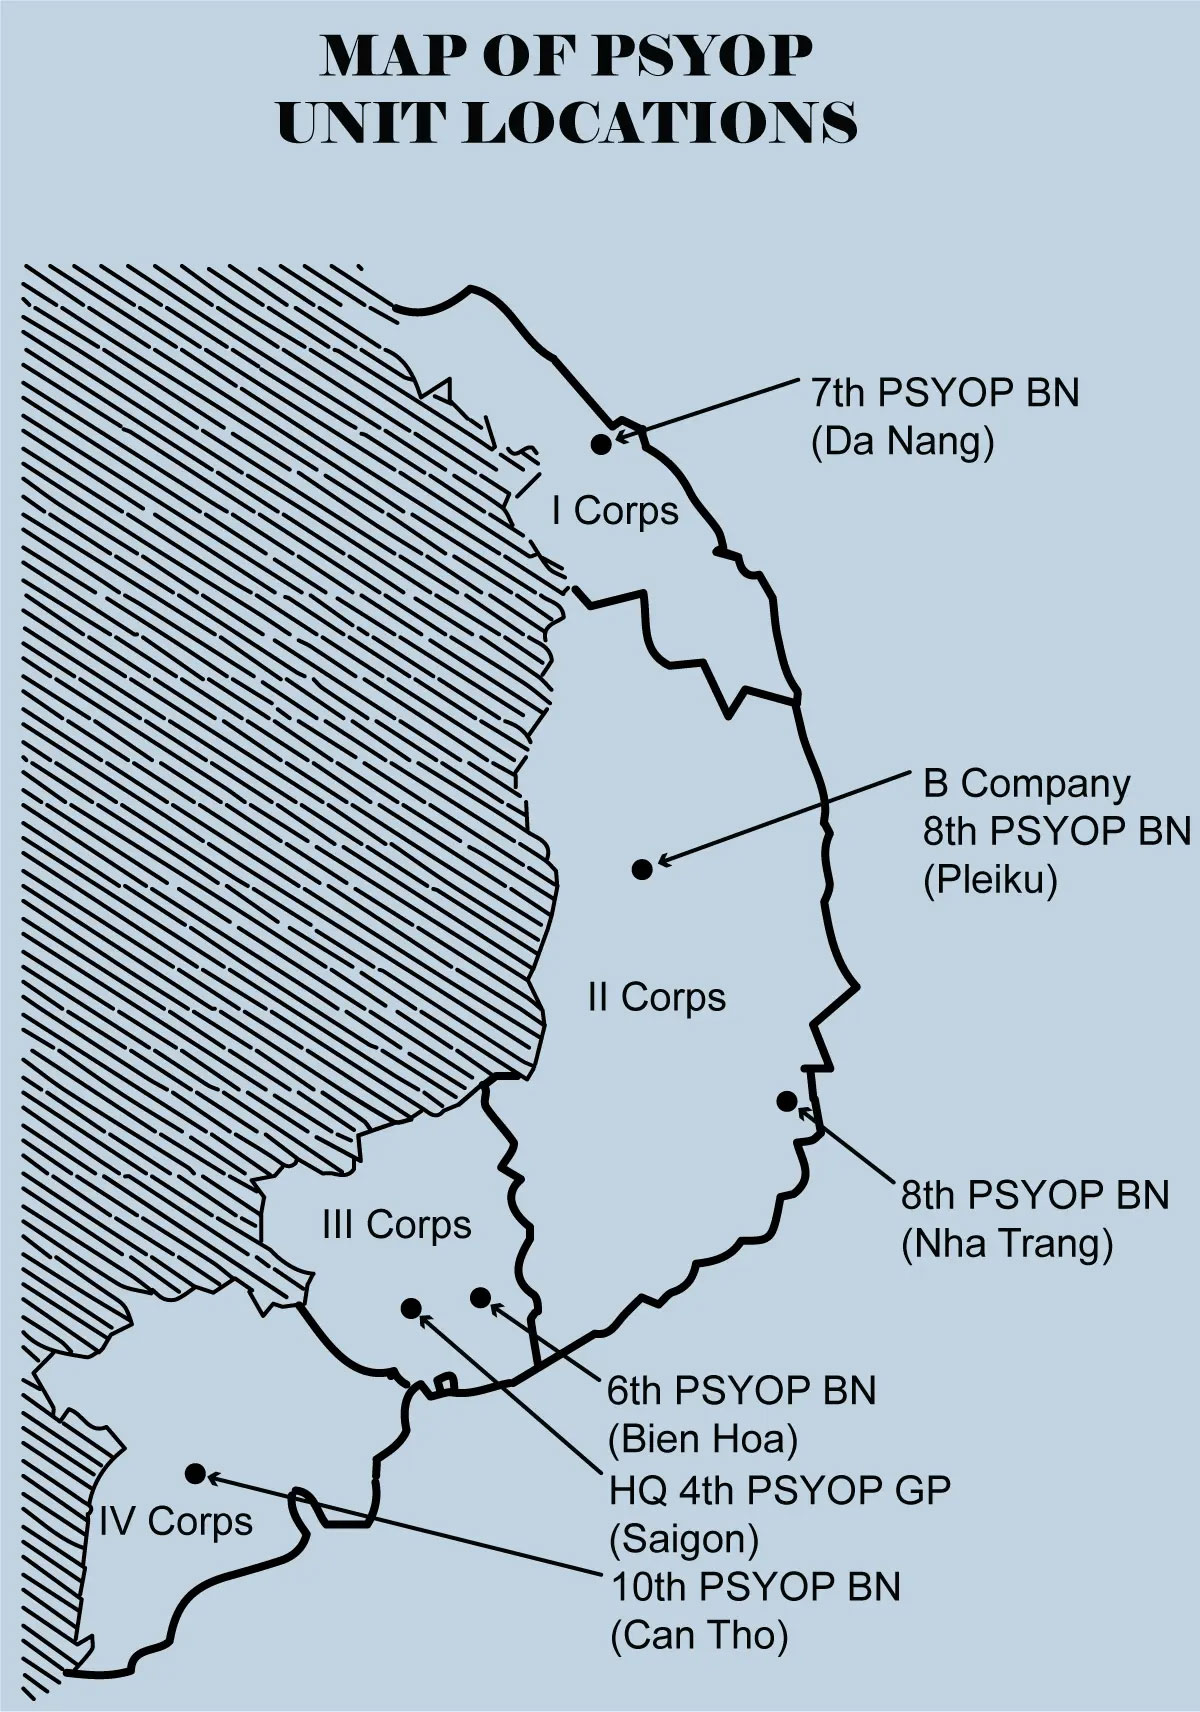 The location of principal U.S. psychological operations